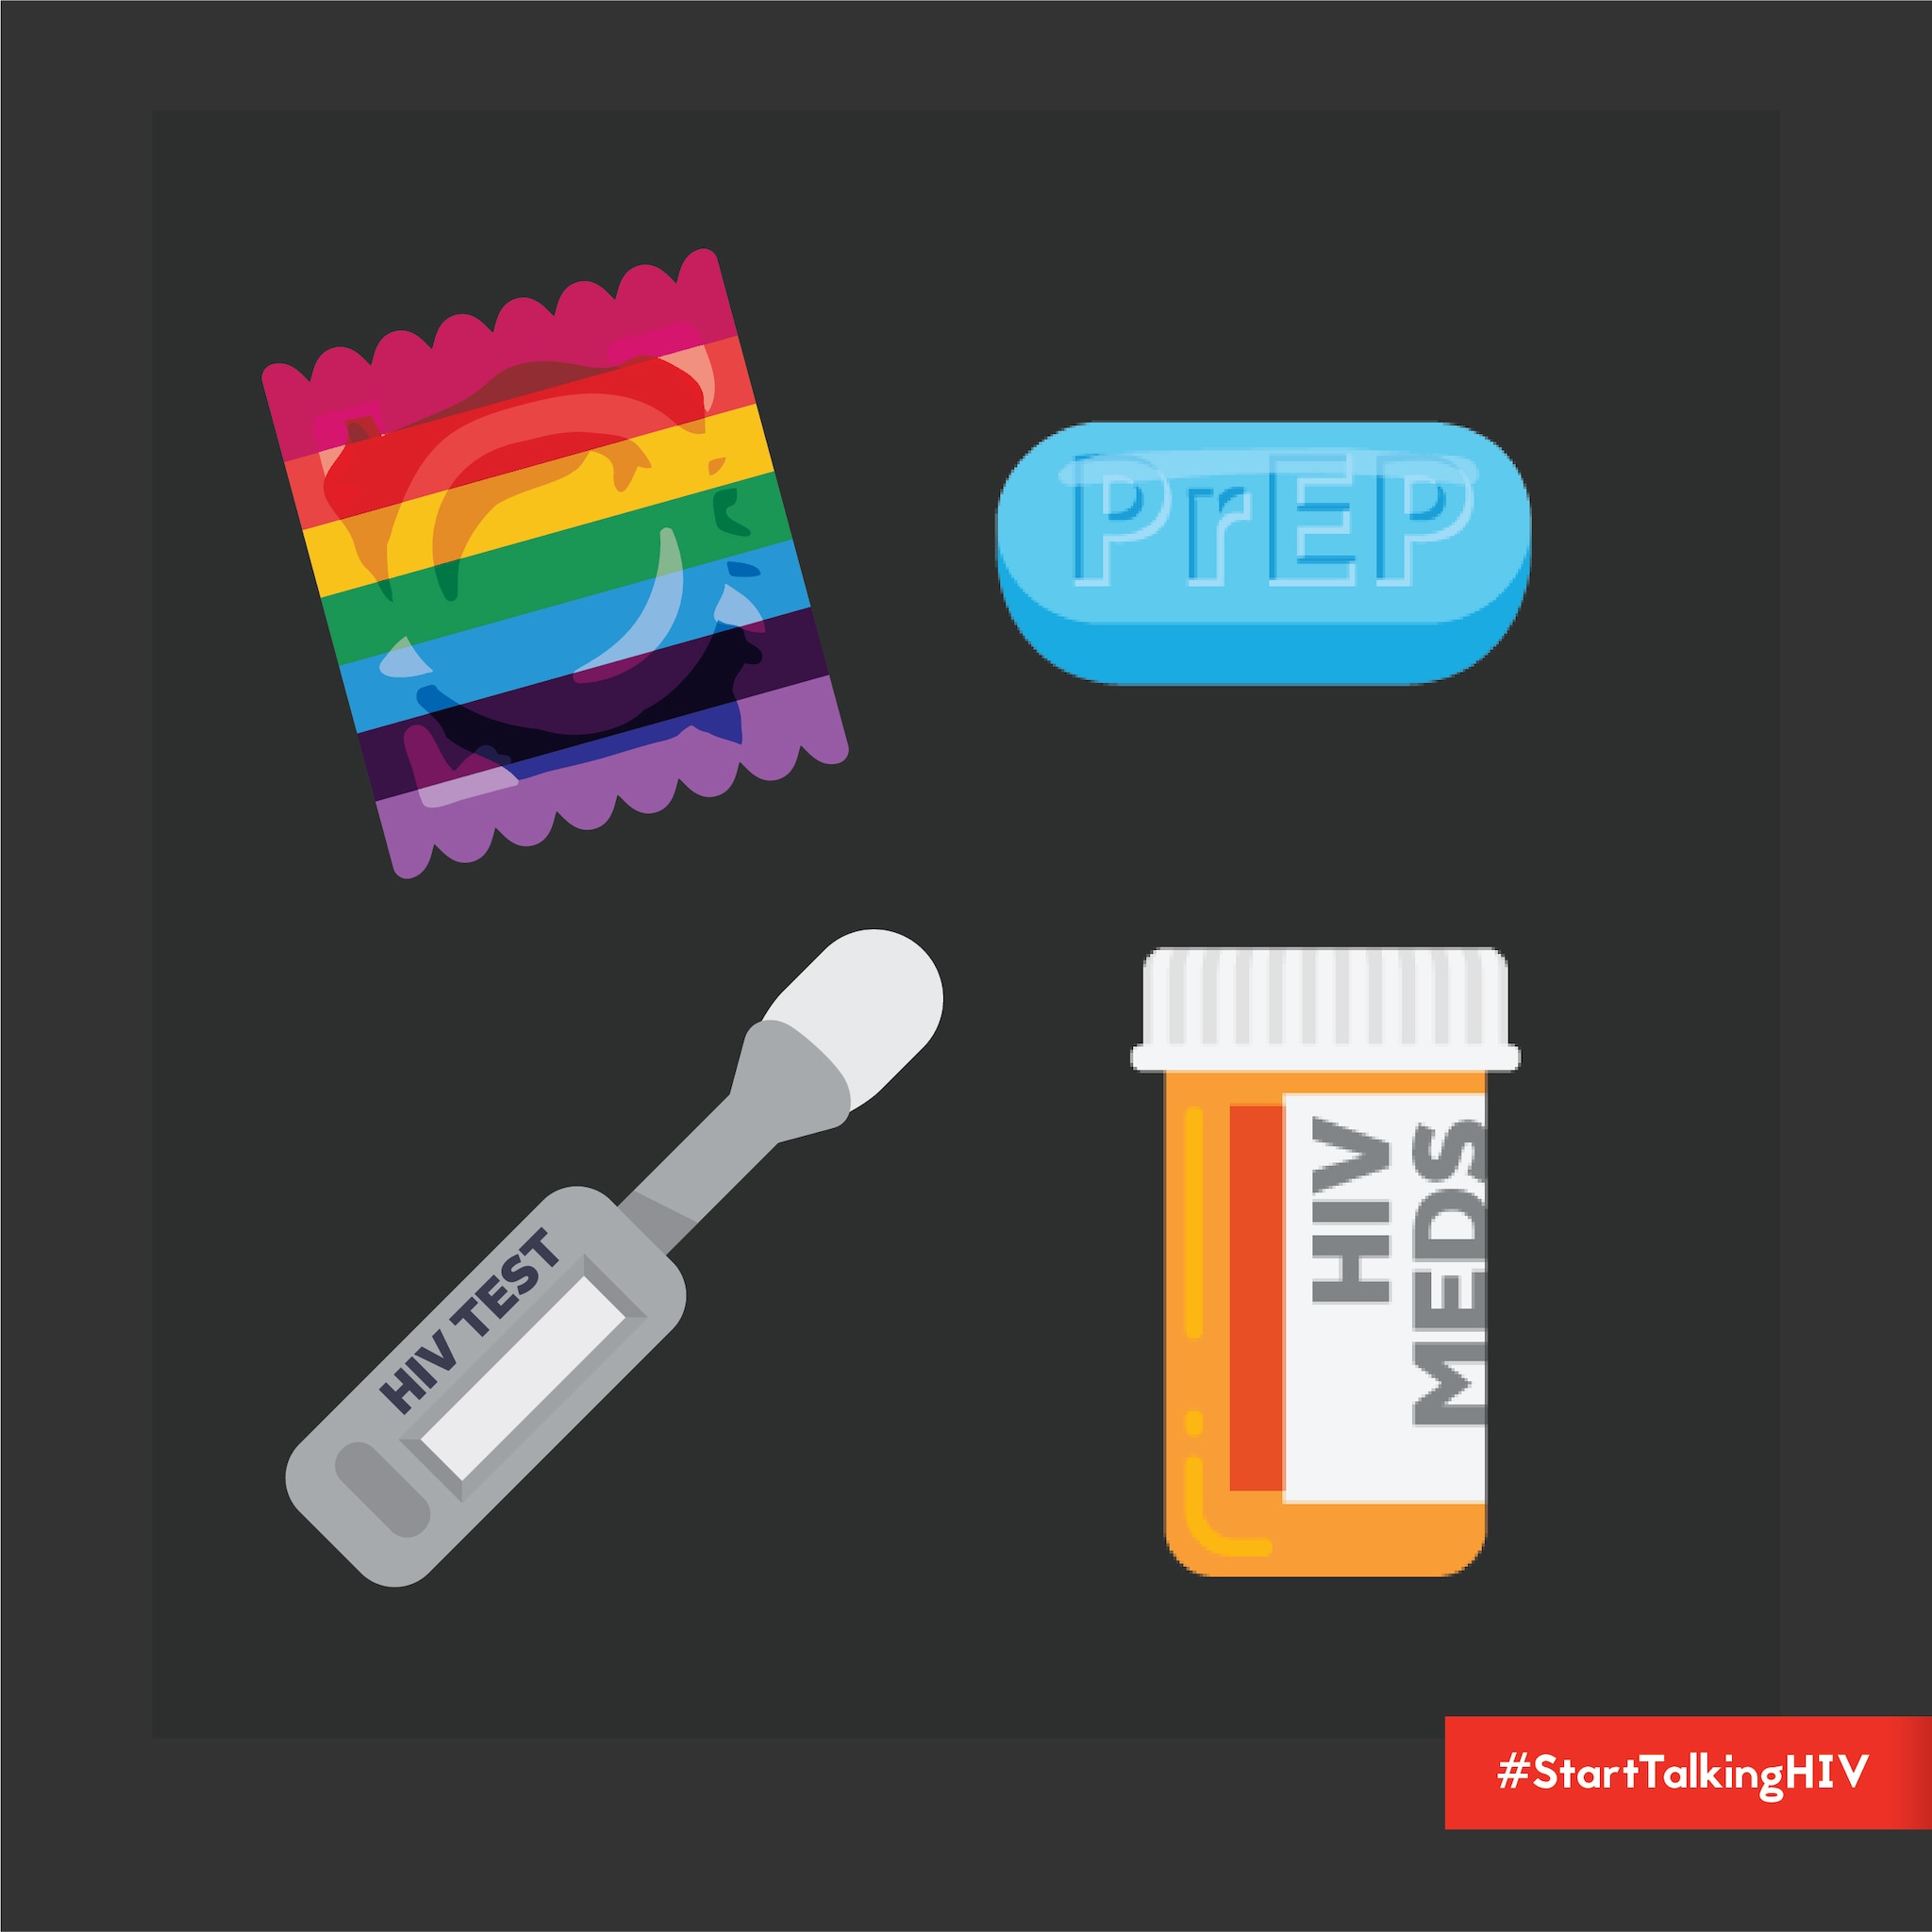 Image displays animation of a condom, a blue pill labeled “PrEP,” a swab device labeled “HIV TEST,” and a pill bottle labeled “HIV MEDS.”